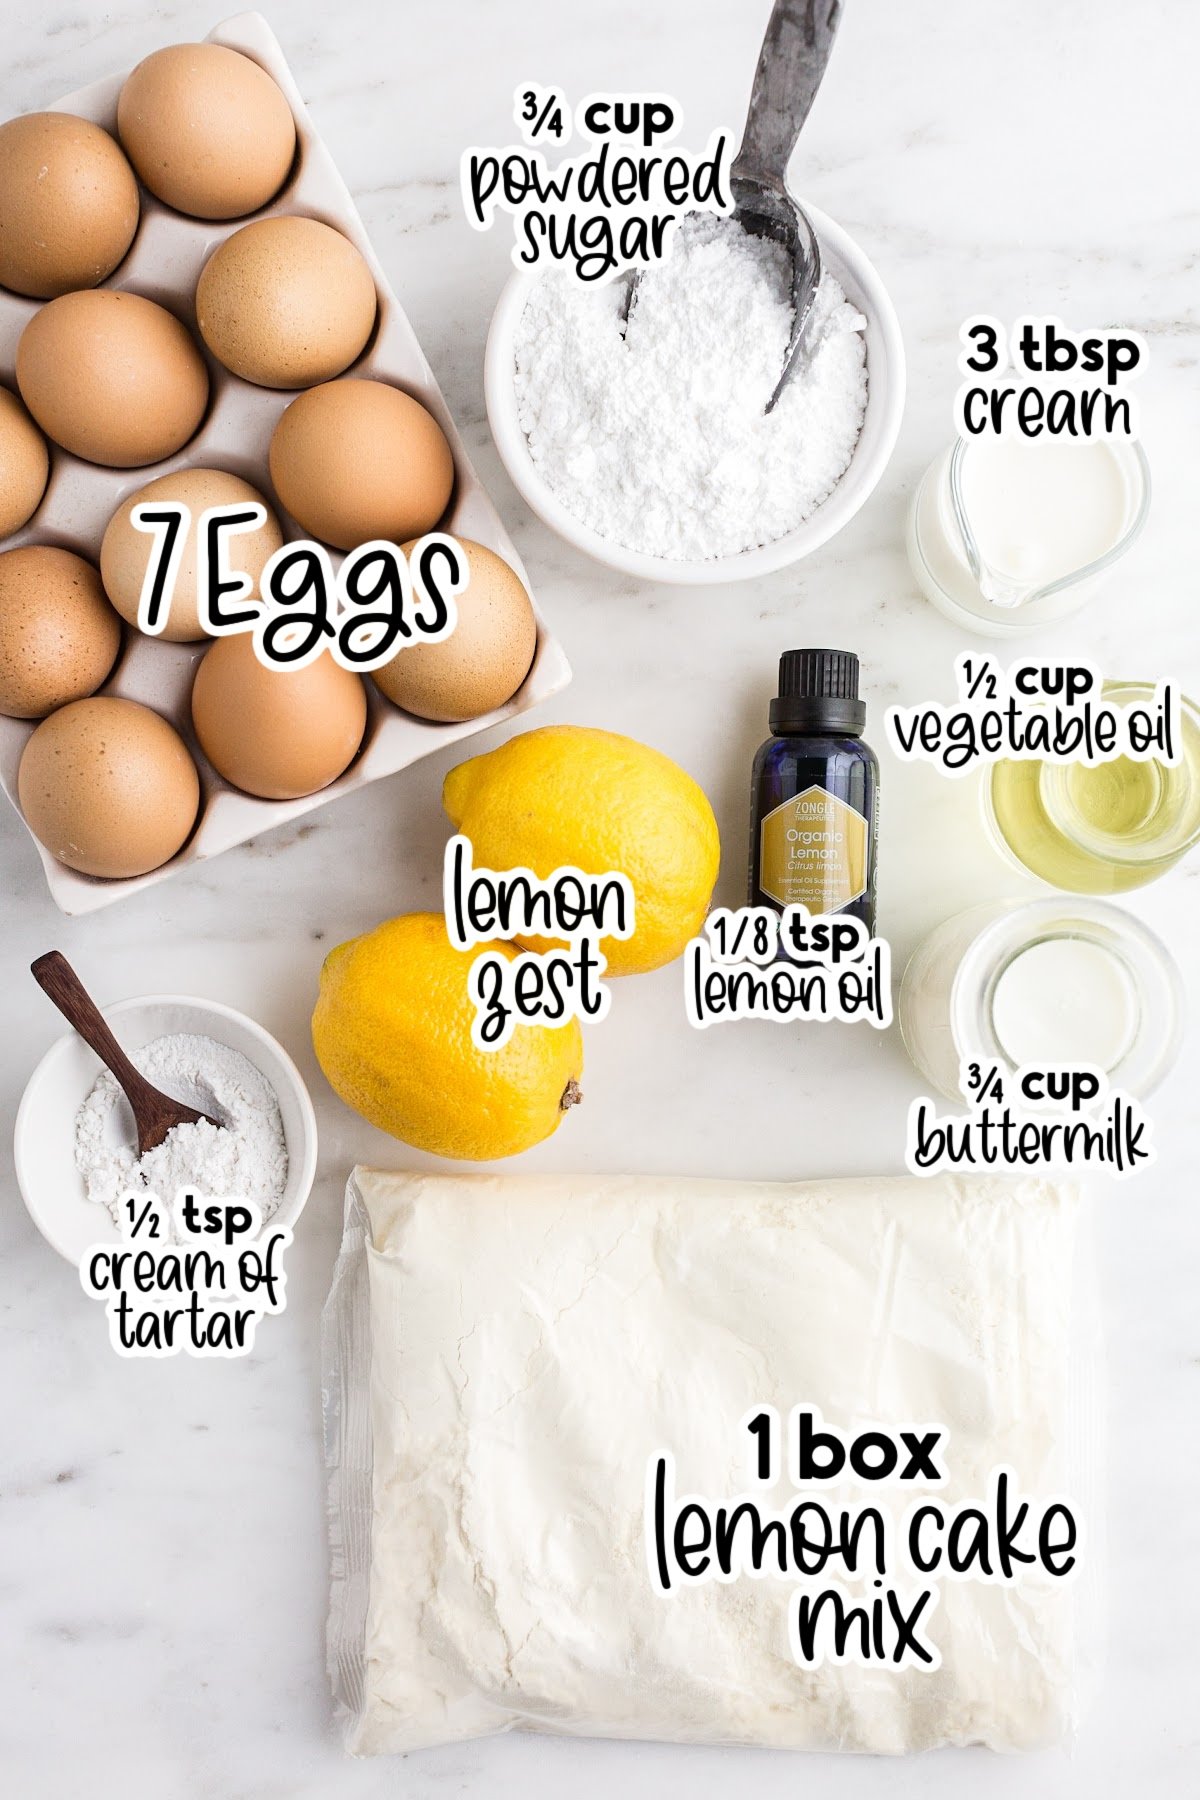 All ingredients set out for recipe in small bowls and egg carton with text overlay.